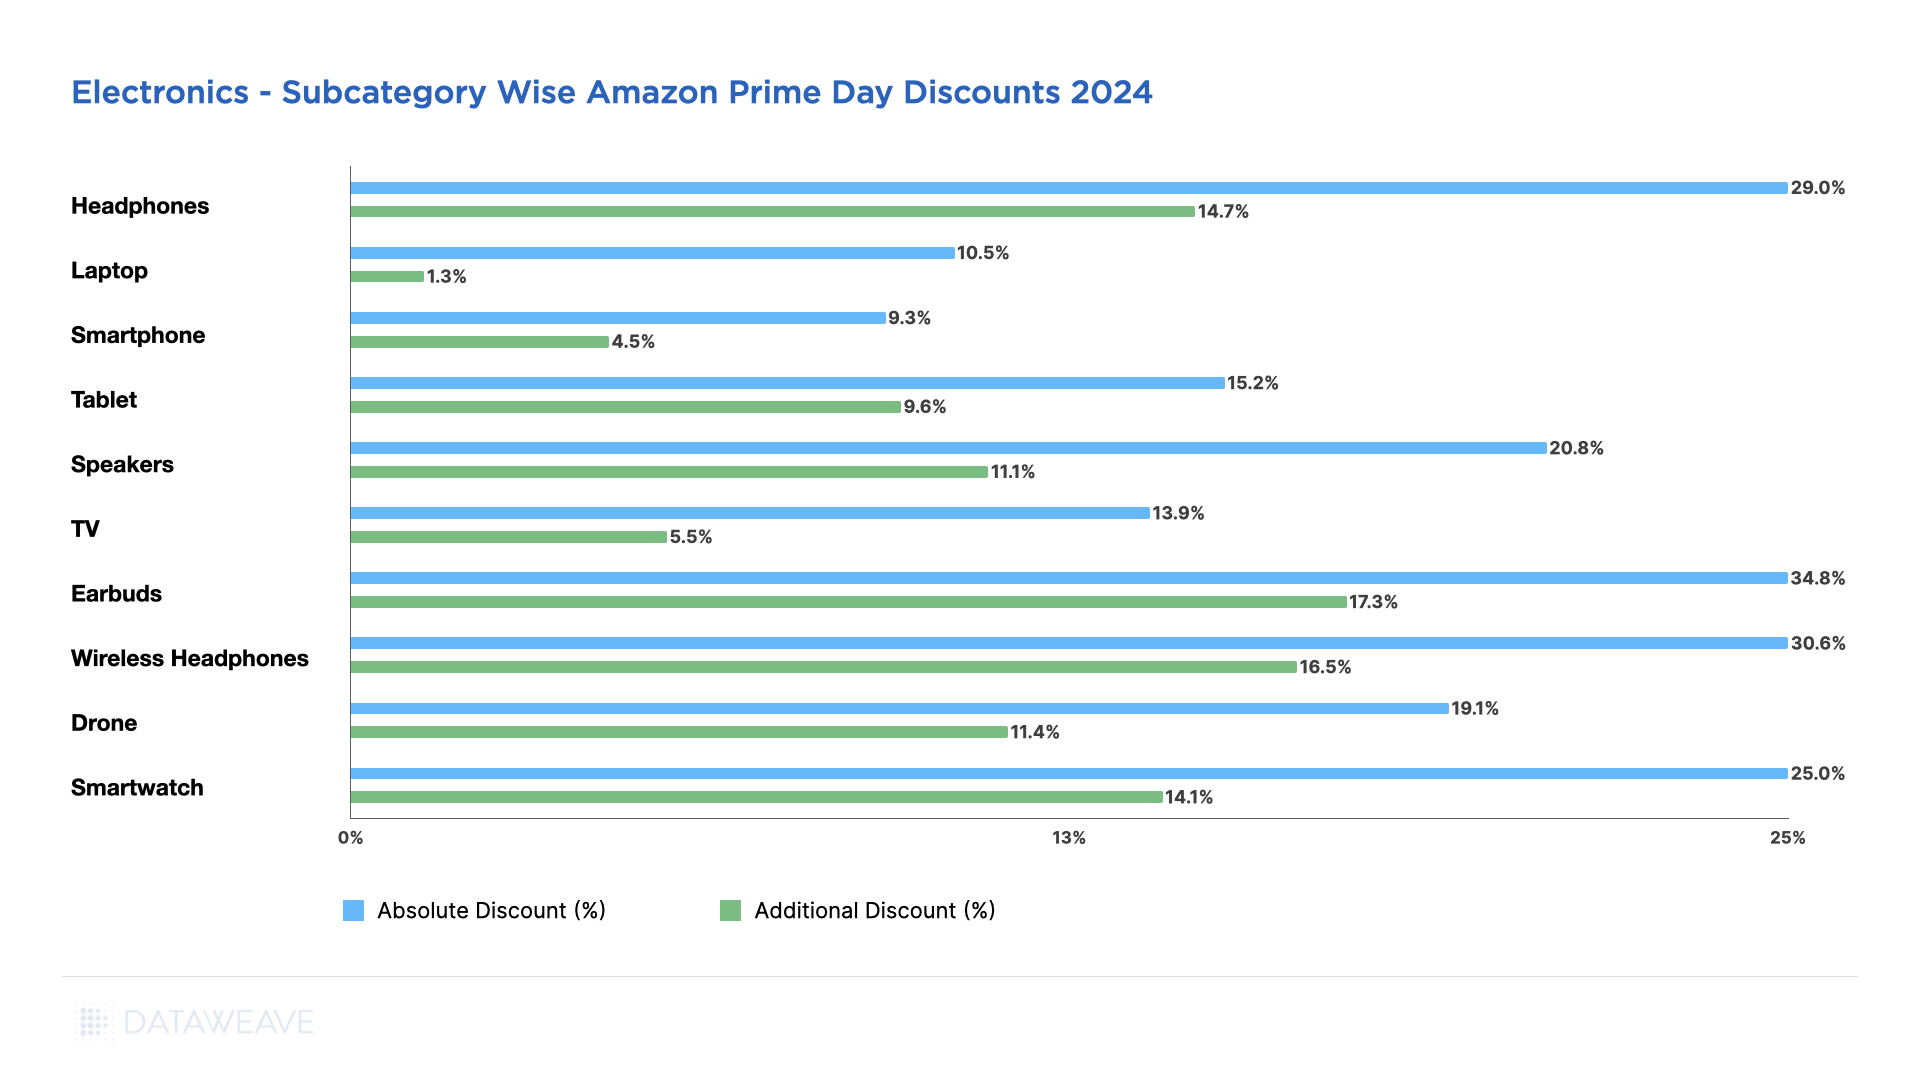 Discounts offered on Consumer Electronics Subcategories During Amazon Prime Day USA 2024.